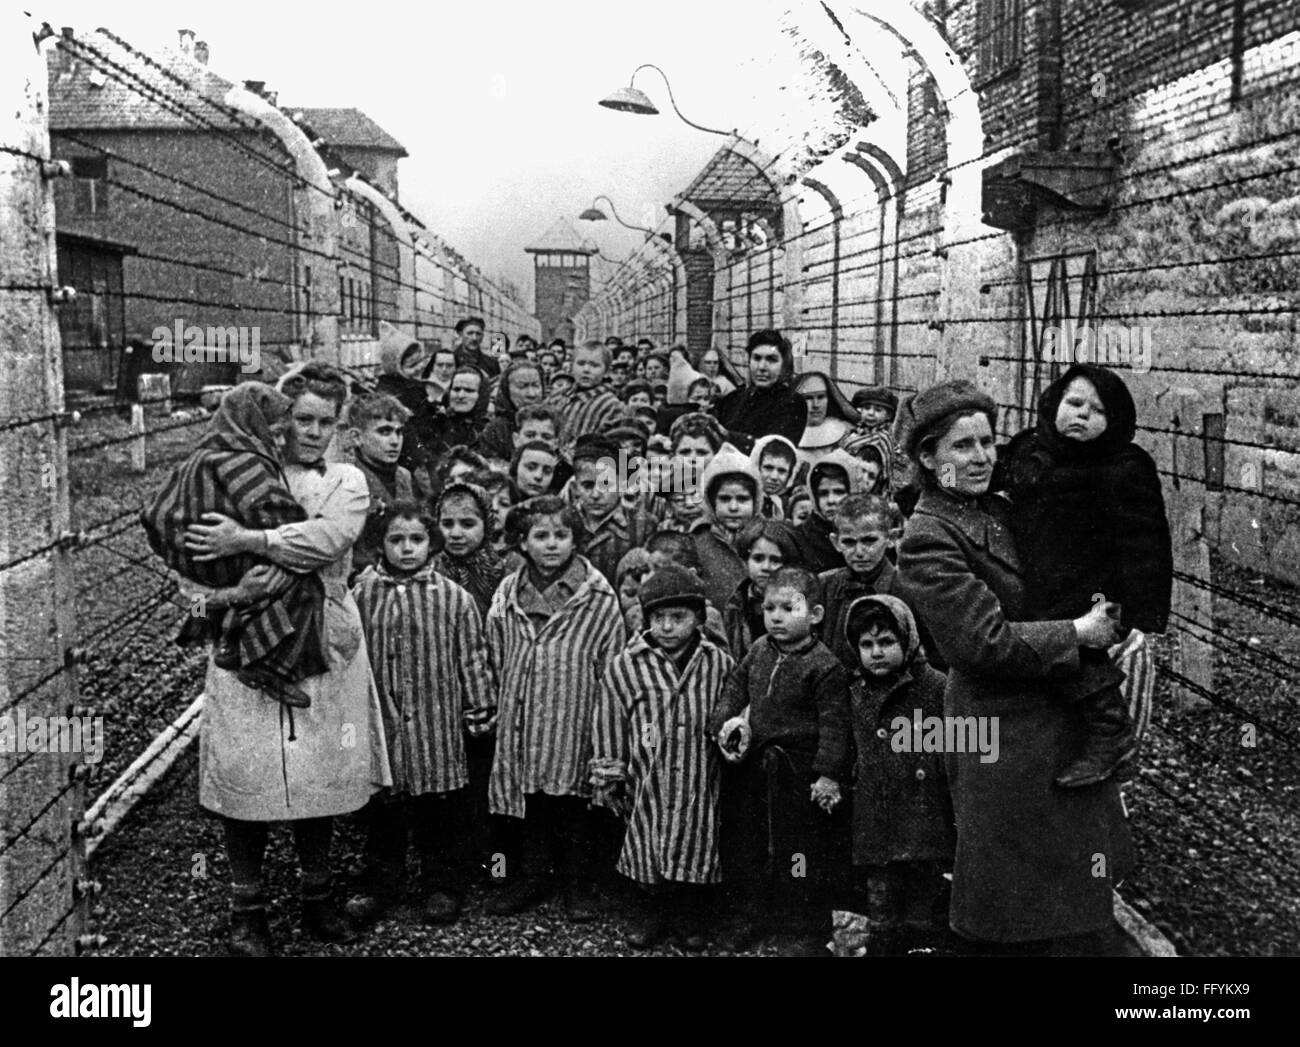 Nazism / National Socialism, crimes, concentration camp, Auschwitz (Oswiecim), Poland, liberation, children and medical personal after the liberation by the Red Army 27.1.1945, Additional-Rights-Clearences-Not Available Stock Photo